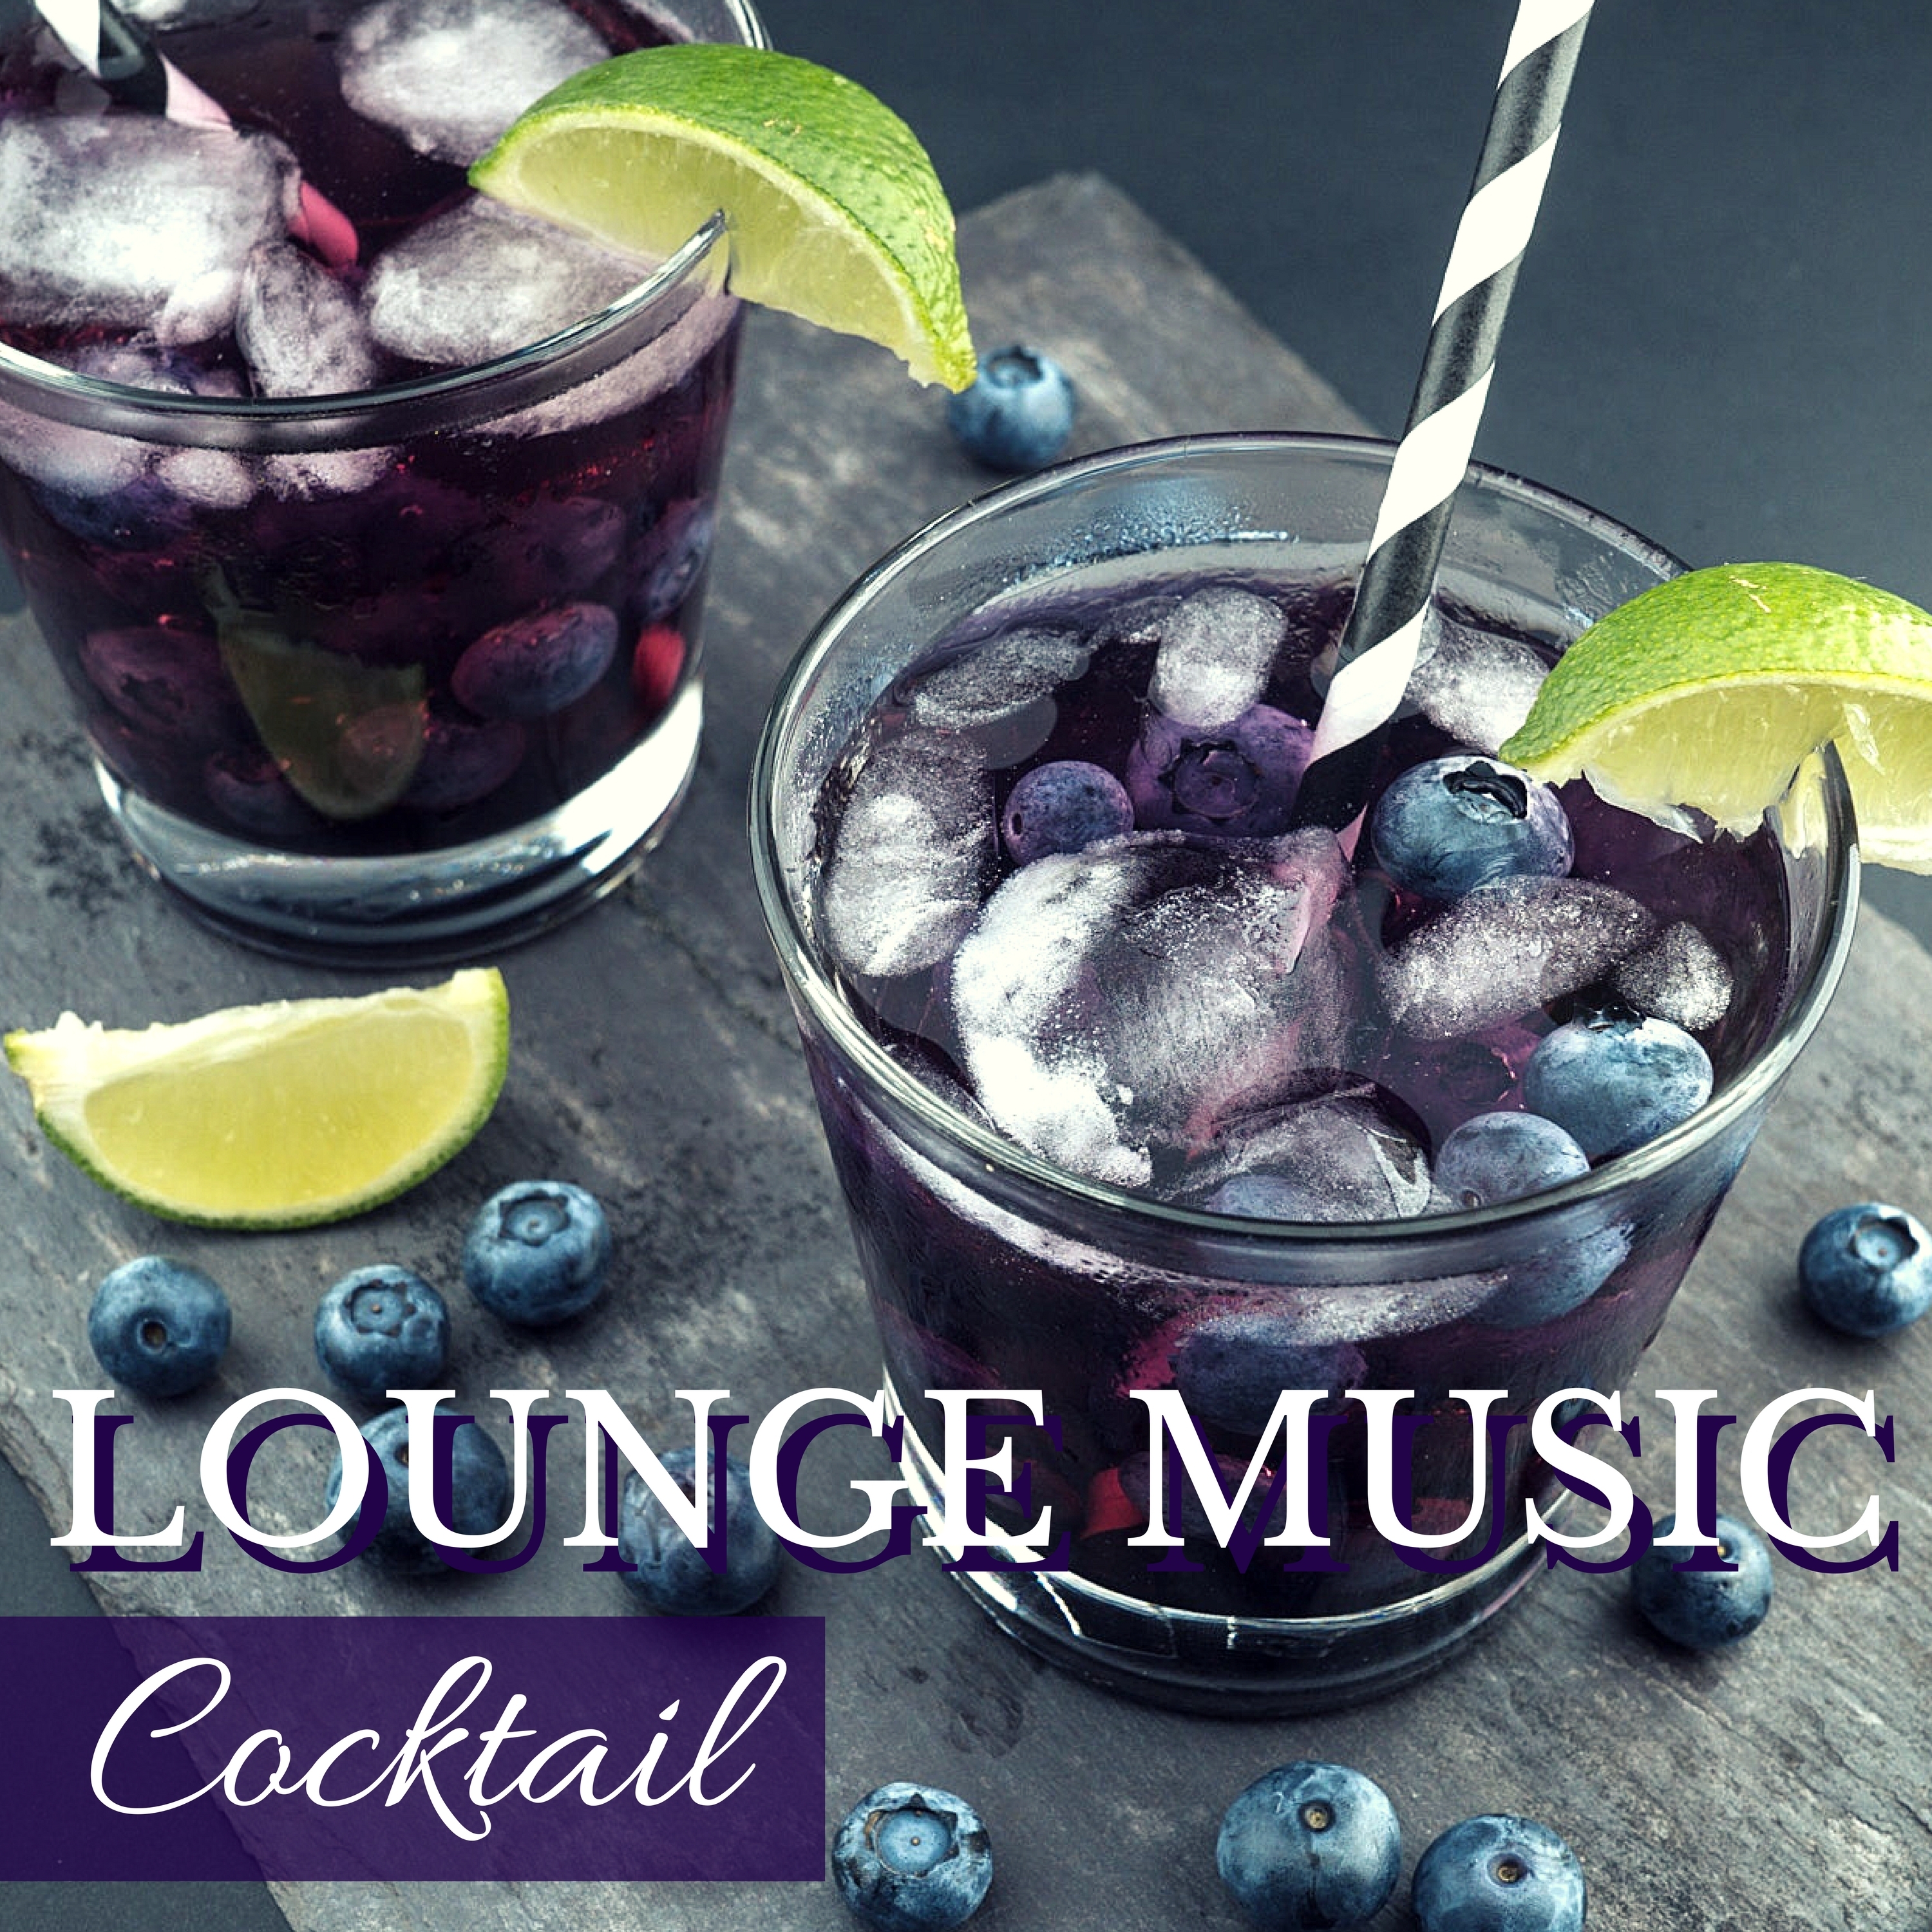 Lounge Music Cocktail - Luxury Lounge Dance Music for Partying and Happy Hour